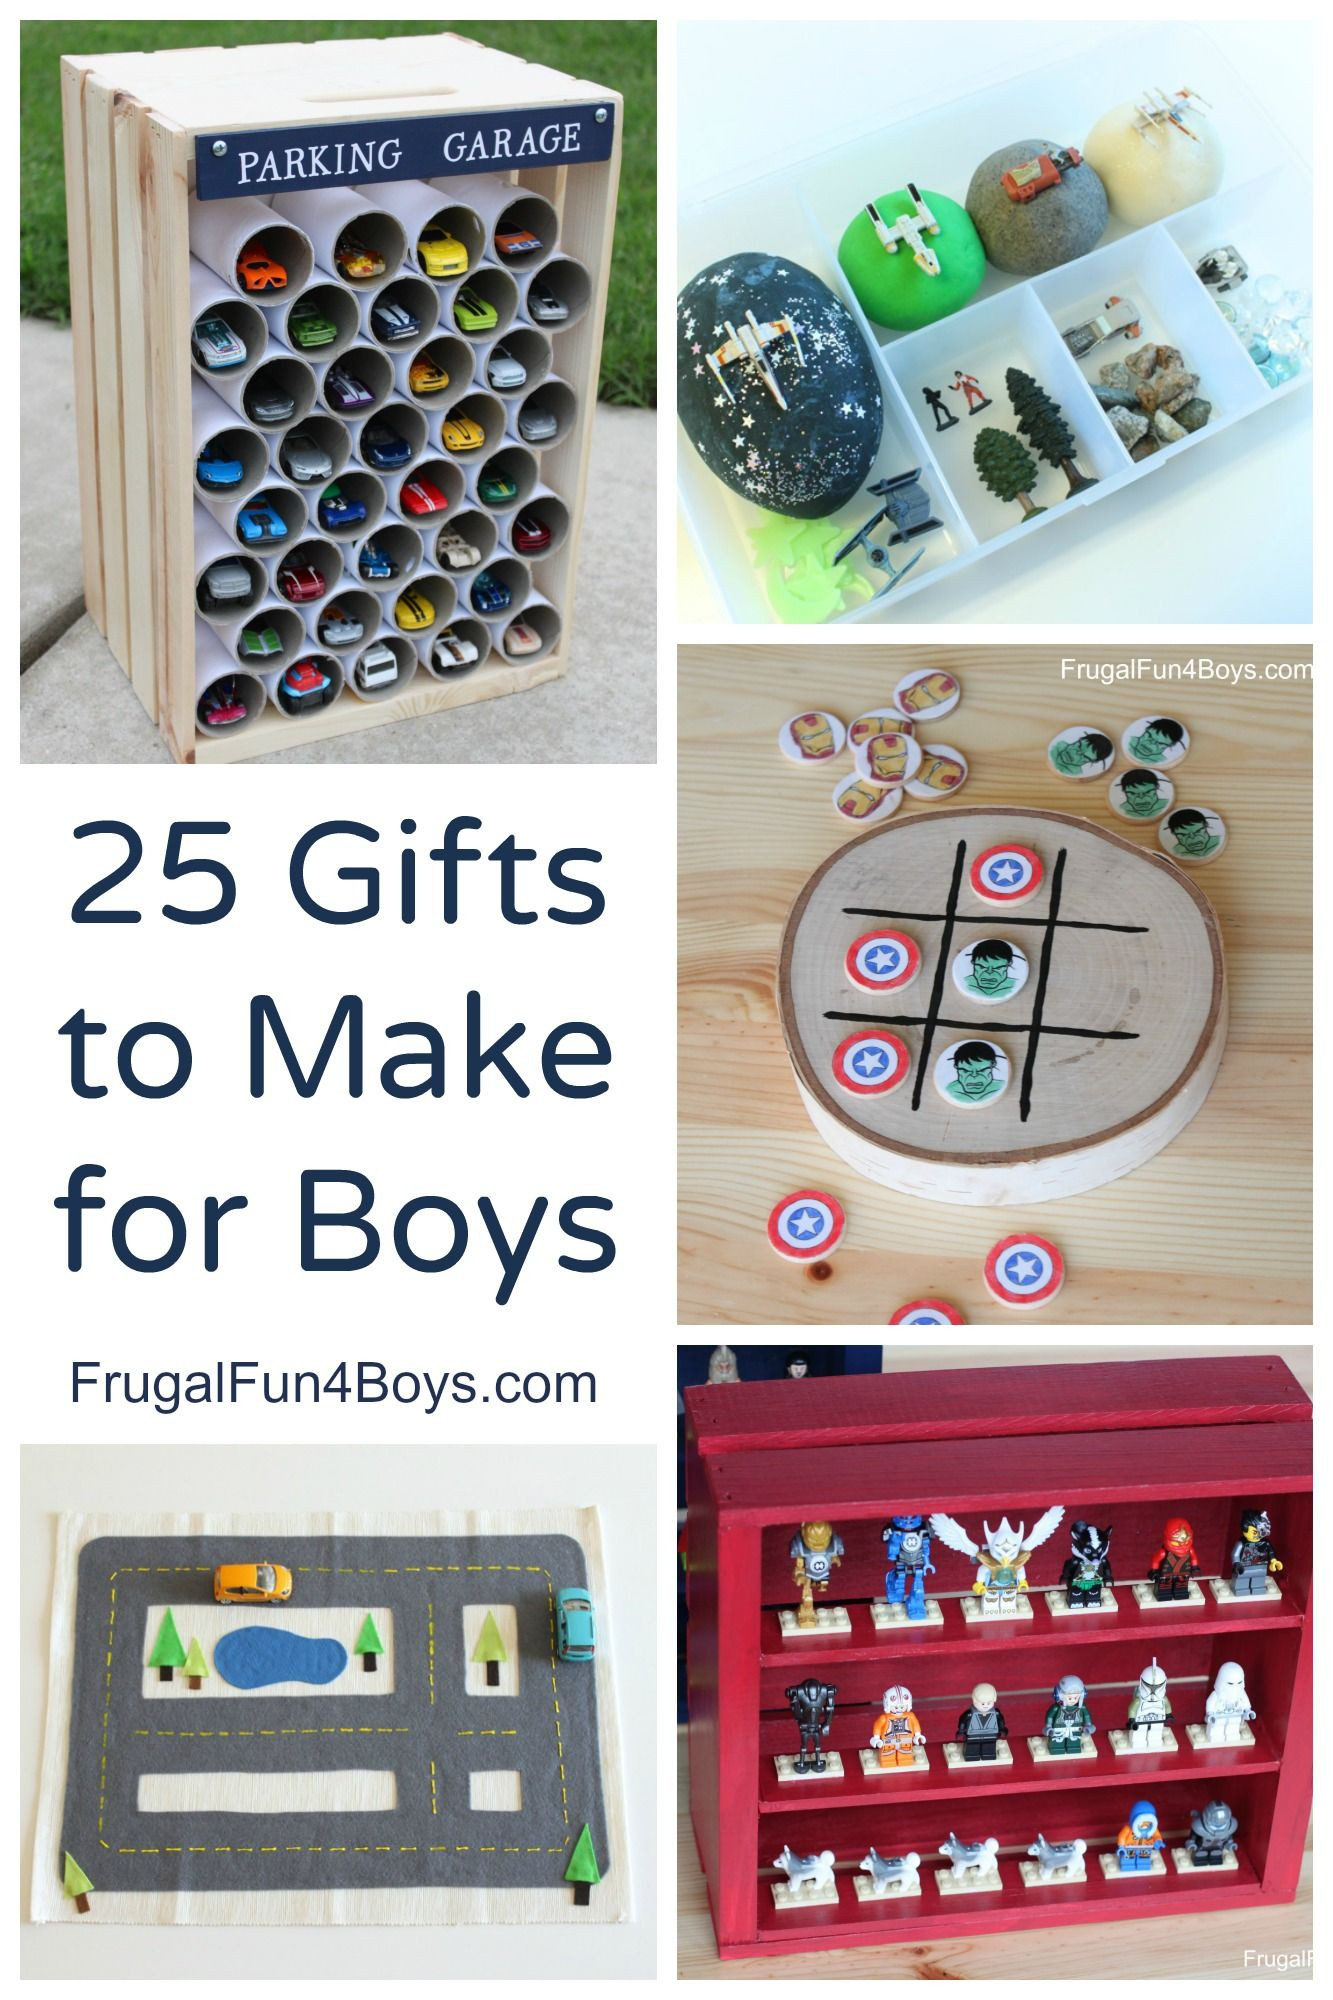 Diy Gift Ideas For Boys
 25 More Homemade Gifts to Make for Boys